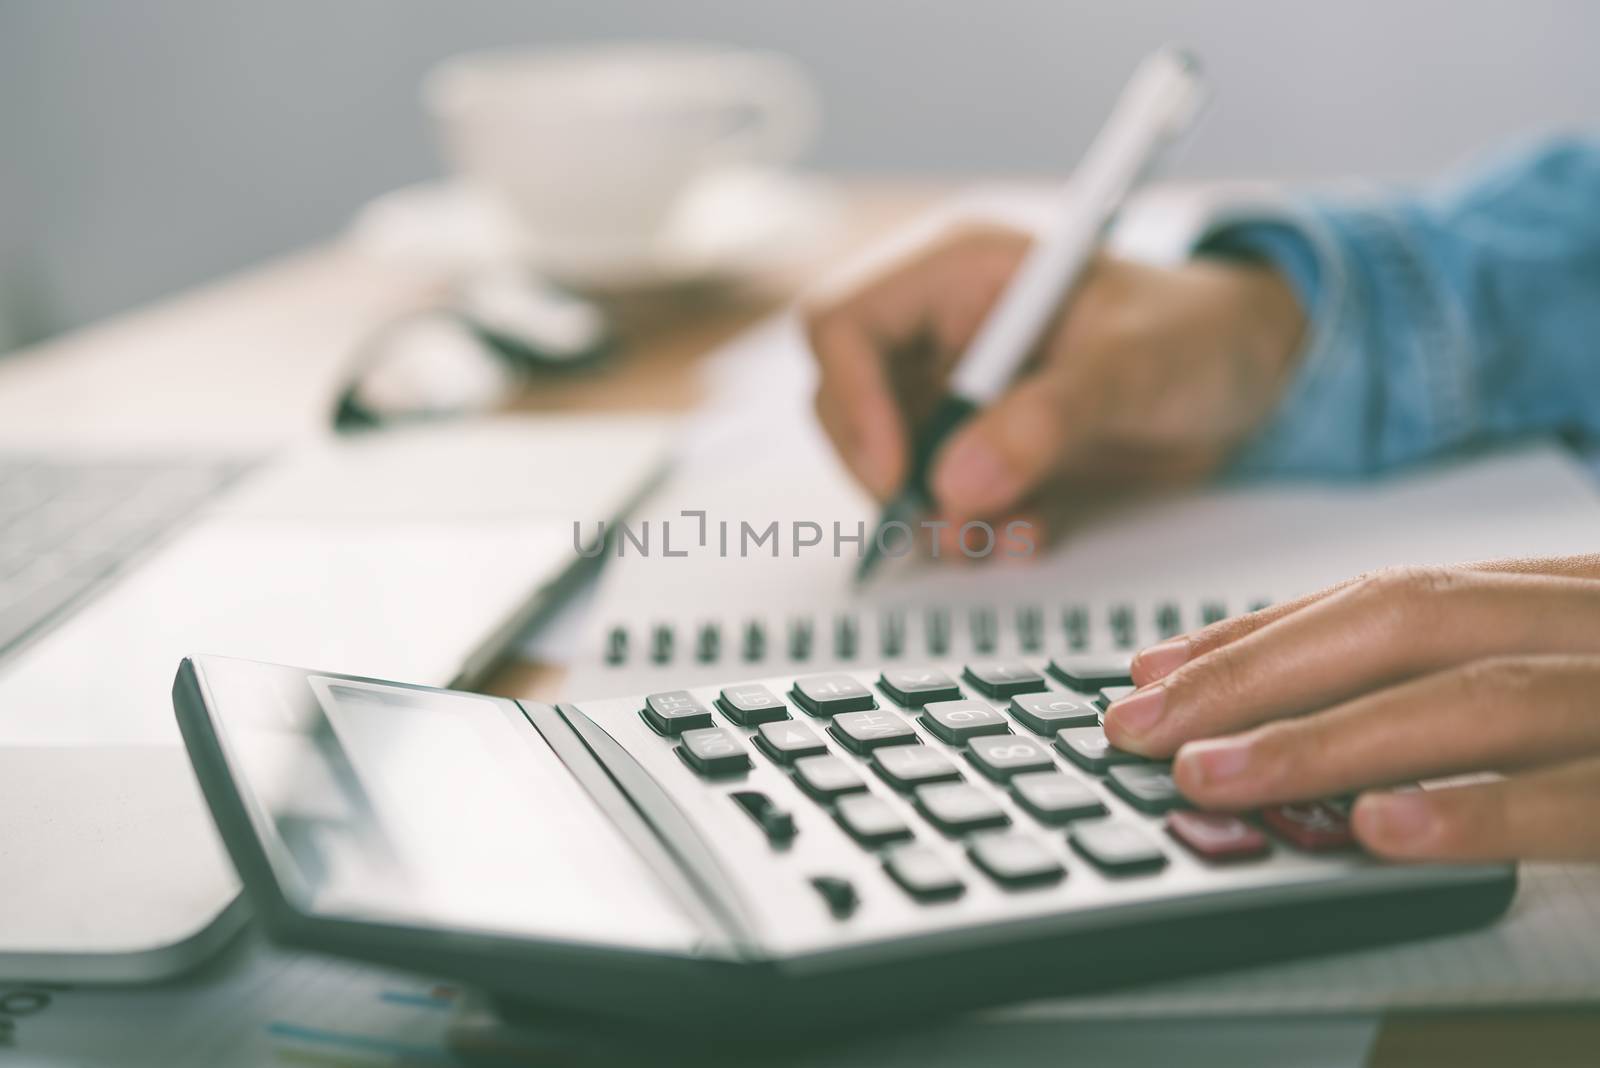 The accountant's hand is using the calculator. For cost analysis by photobyphotoboy